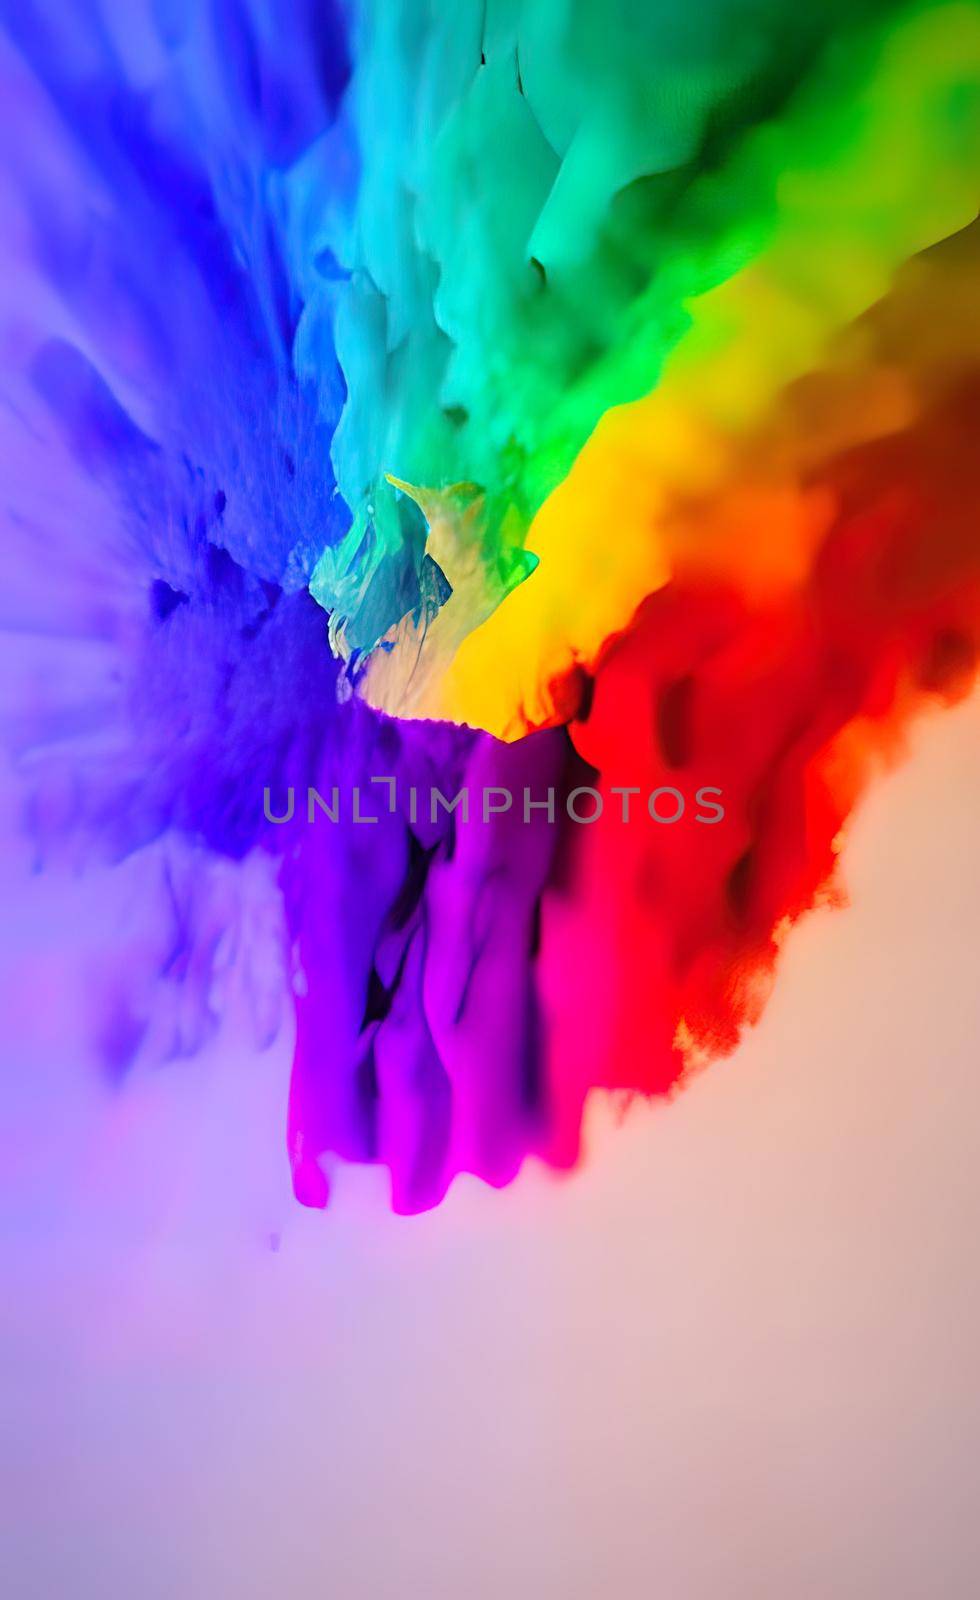 abstract powder paint background with splashes